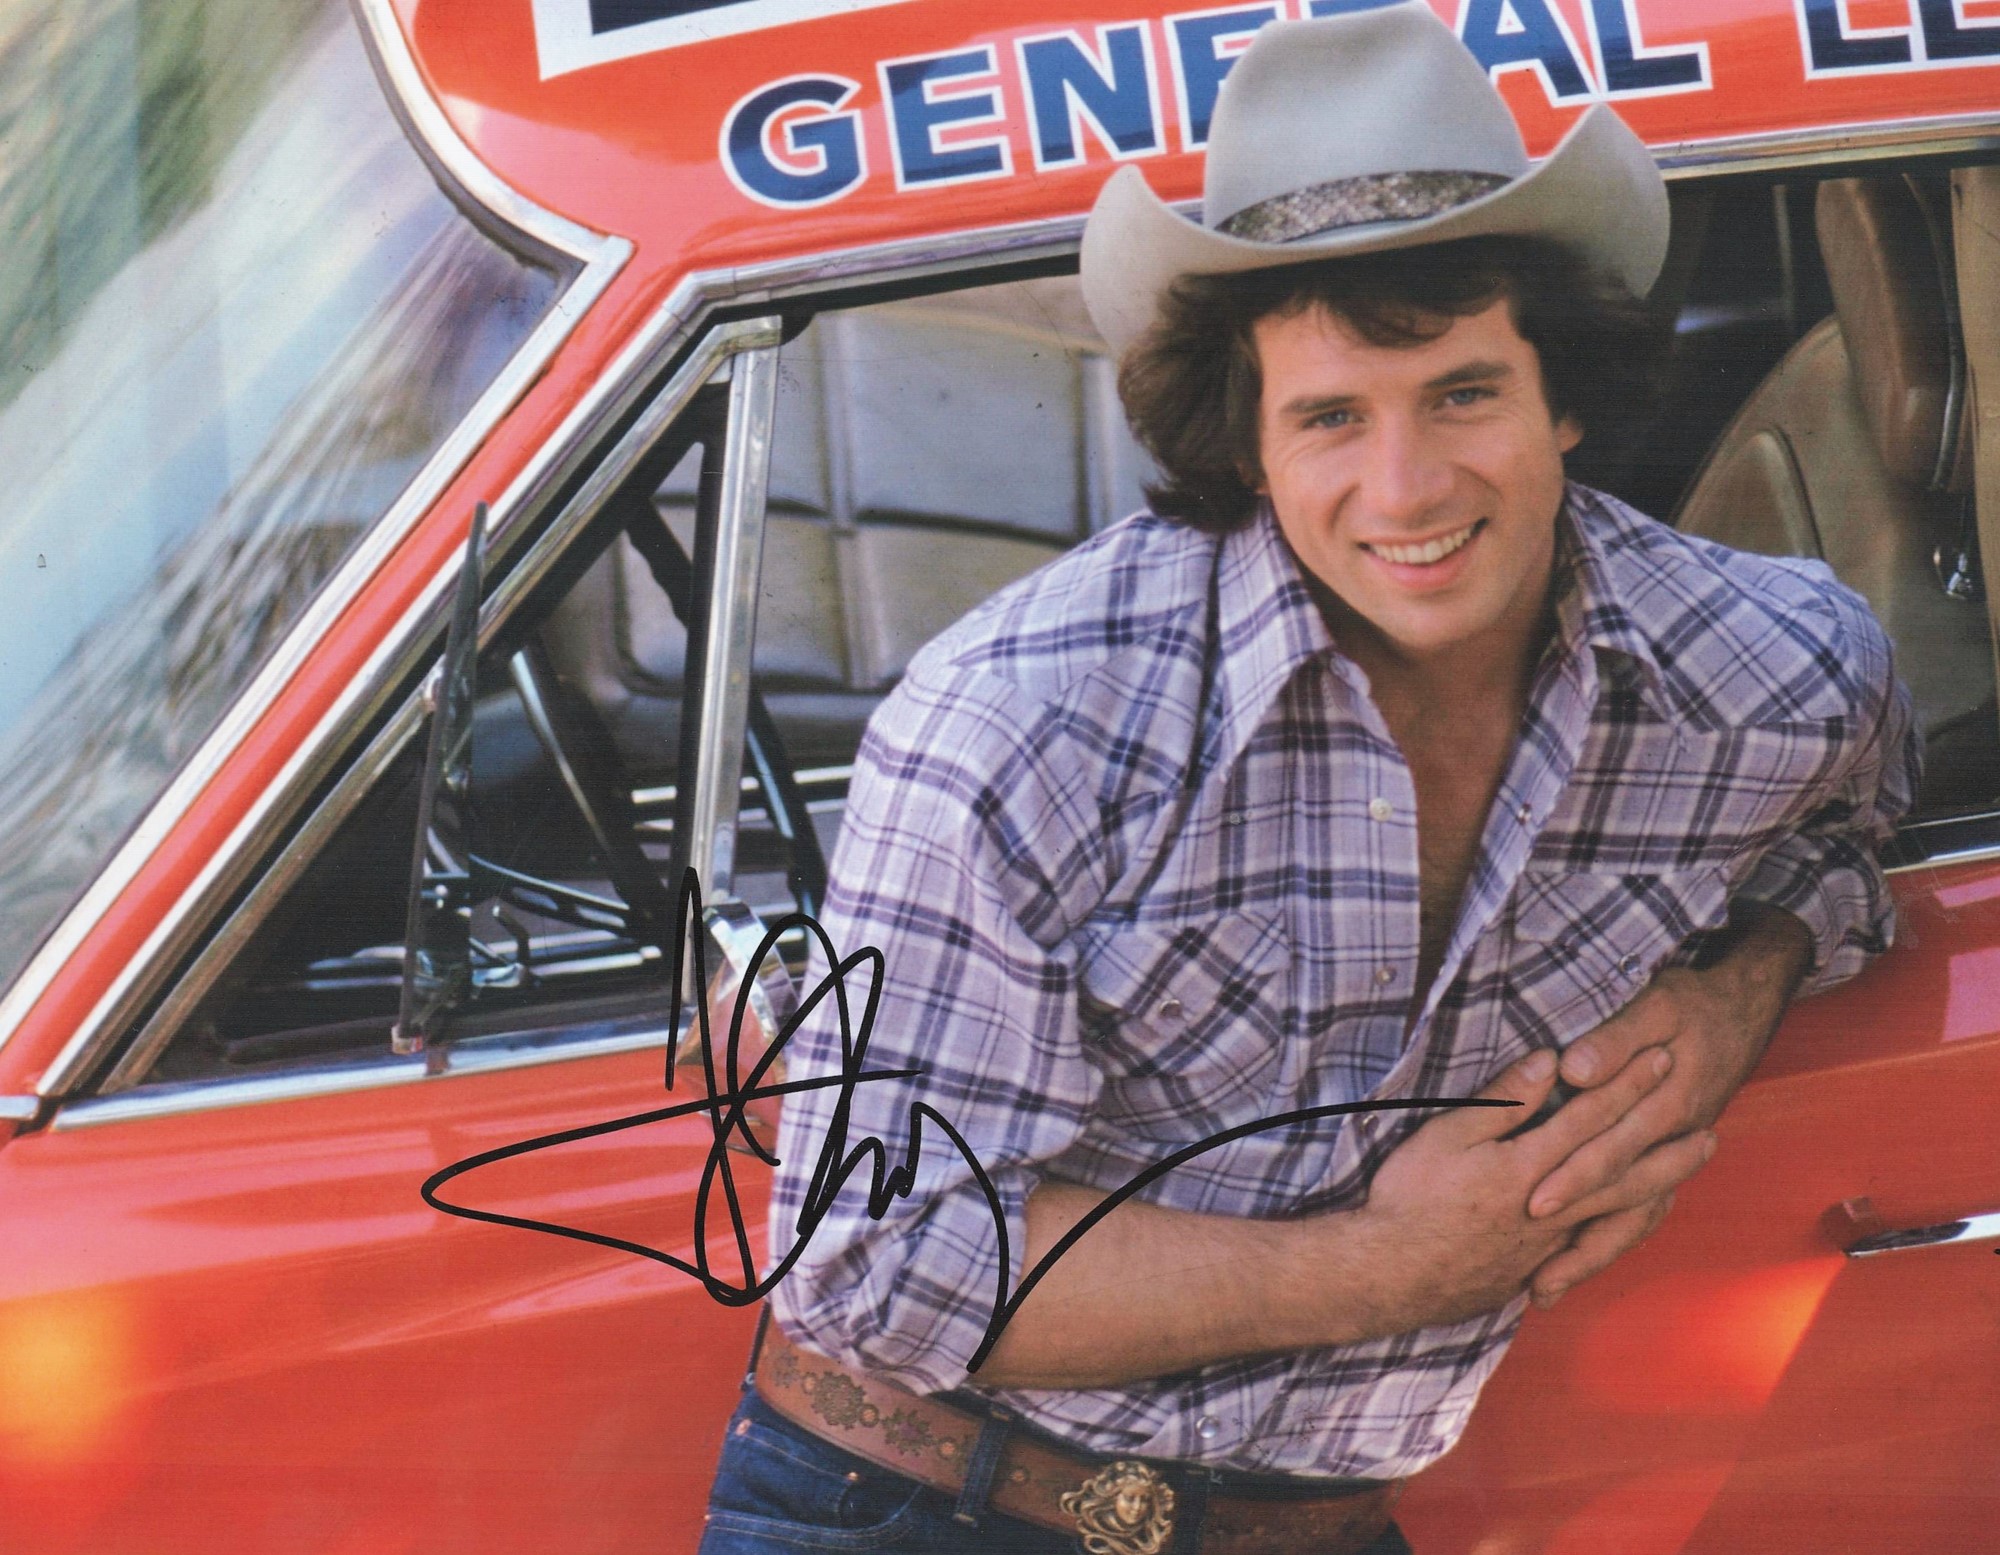 Dukes of Hazzard Actor, Tom Wopat signed 10x8 colour photograph. Wopat (born September 9, 1951) is